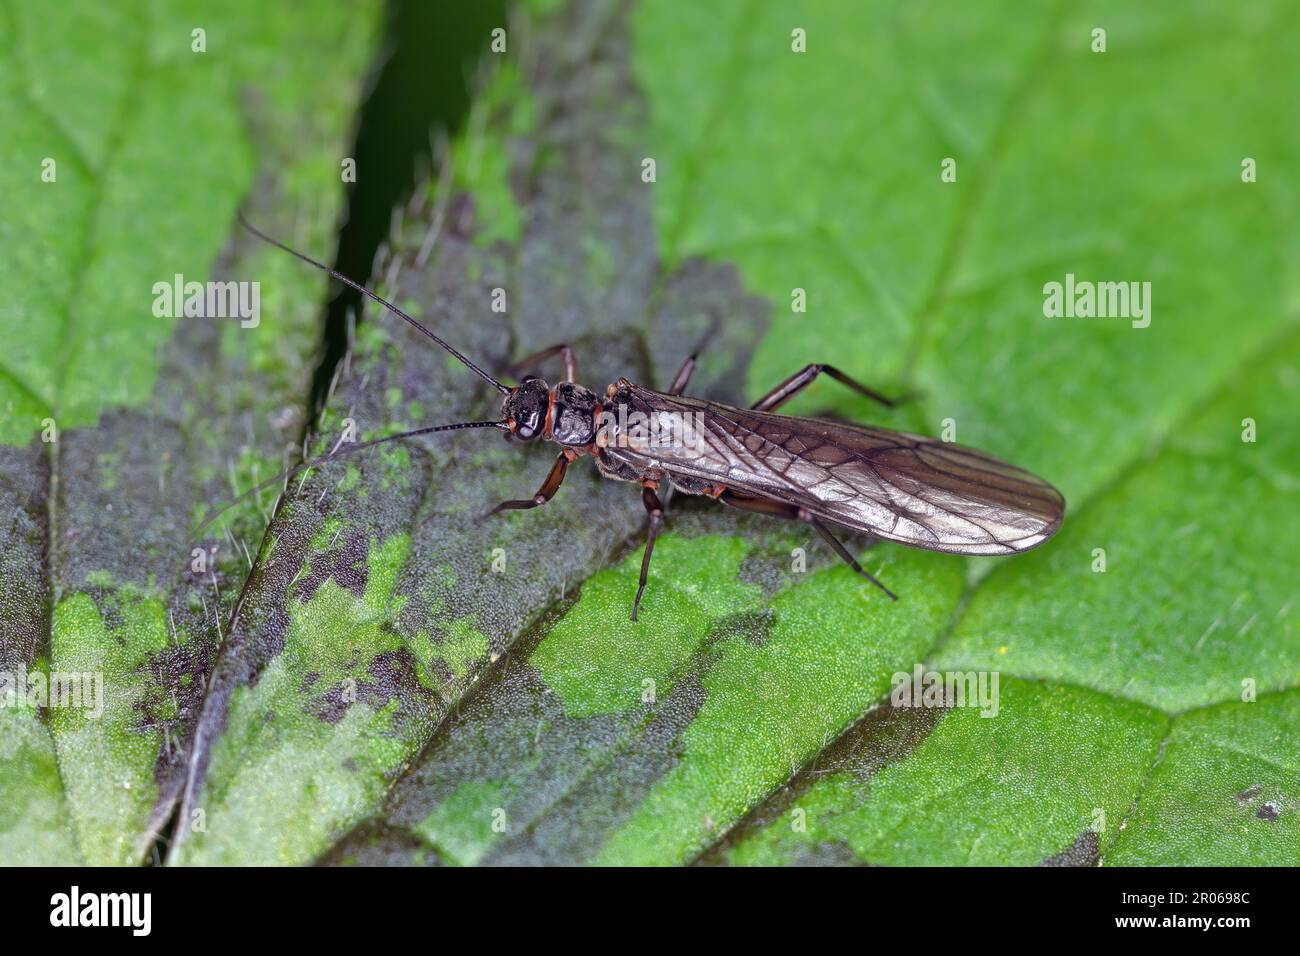 Adult of Perla sp. (Perlidae, Plecoptera). Insect commonly known as stoneflie. Stock Photo